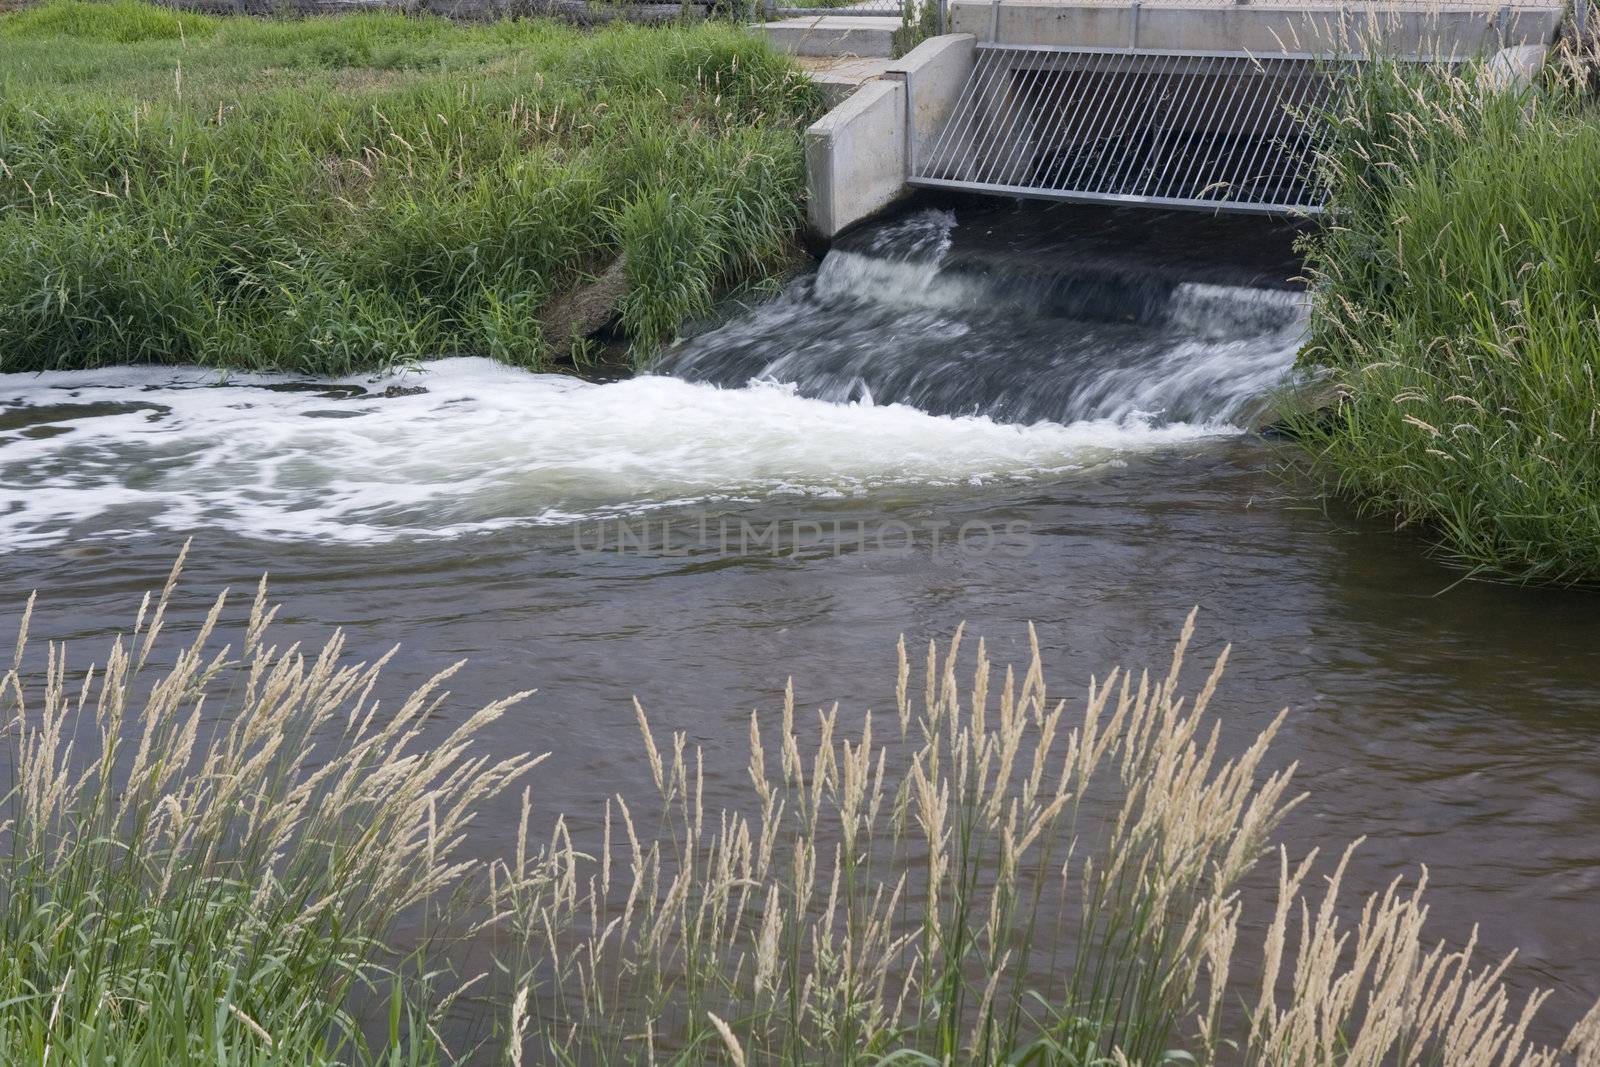 Processed and cleaned sewage flowing out from water reclamation facility to a narrow river or canal with grassy banks